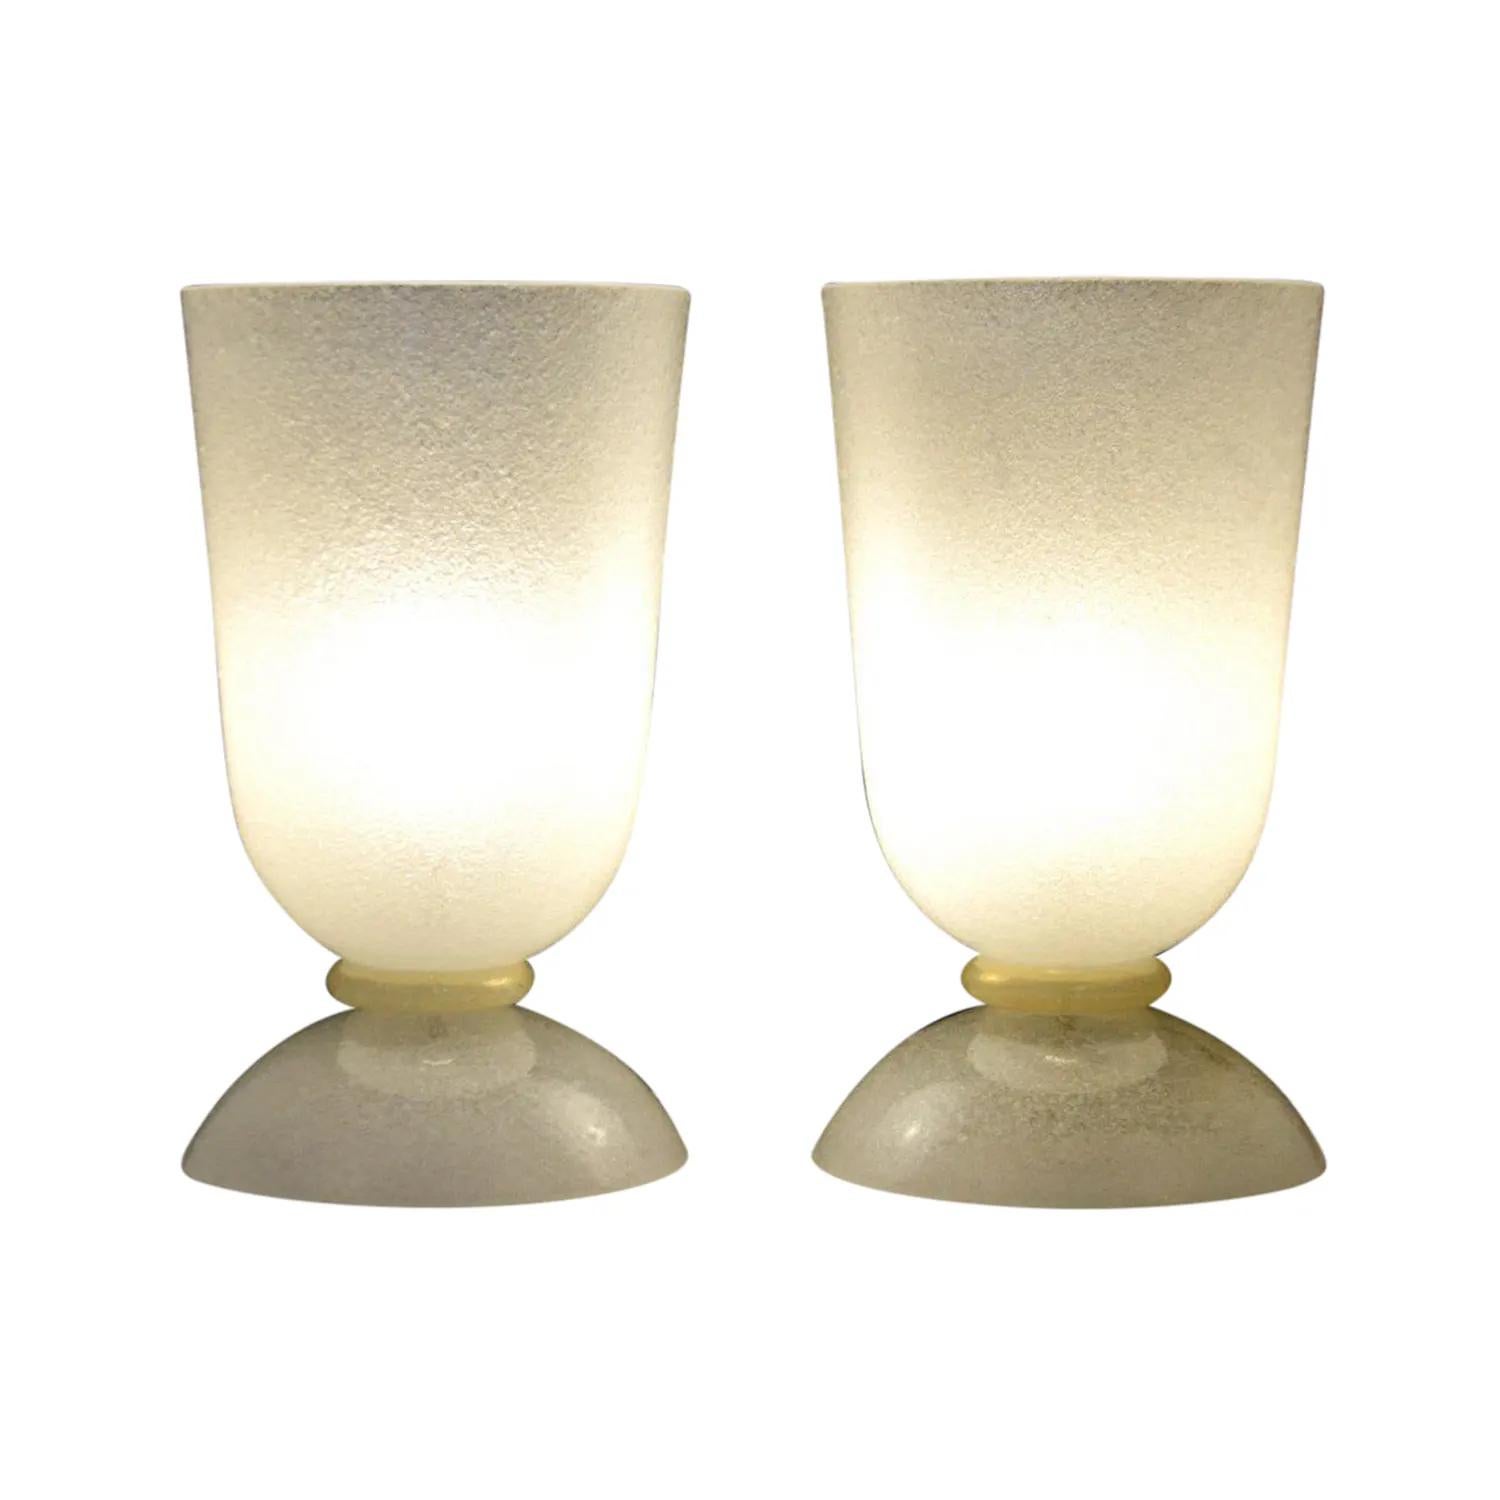 A vintage Mid-Century Modern Italian pair of Scavo table lamps made of hand blown Murano glass, enhanced by a detailed yellow-white ring in the style of Alfredo Barbini, in good condition. The smoked desk lights are in the shape of a vase, featuring